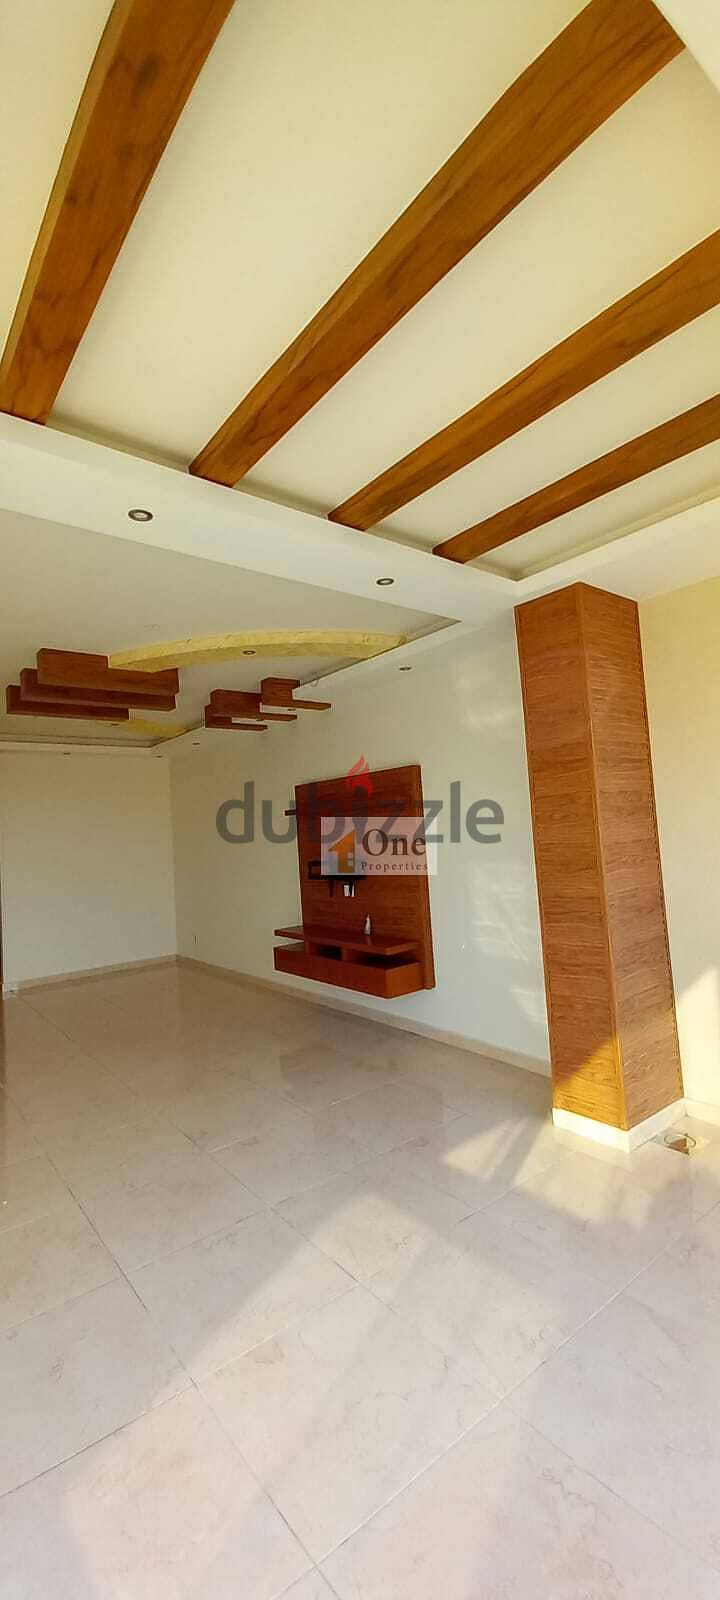 DUPLEX for SALE, in NAHER IBRAHIM / JBEIL, with a mountain & sea view. 8